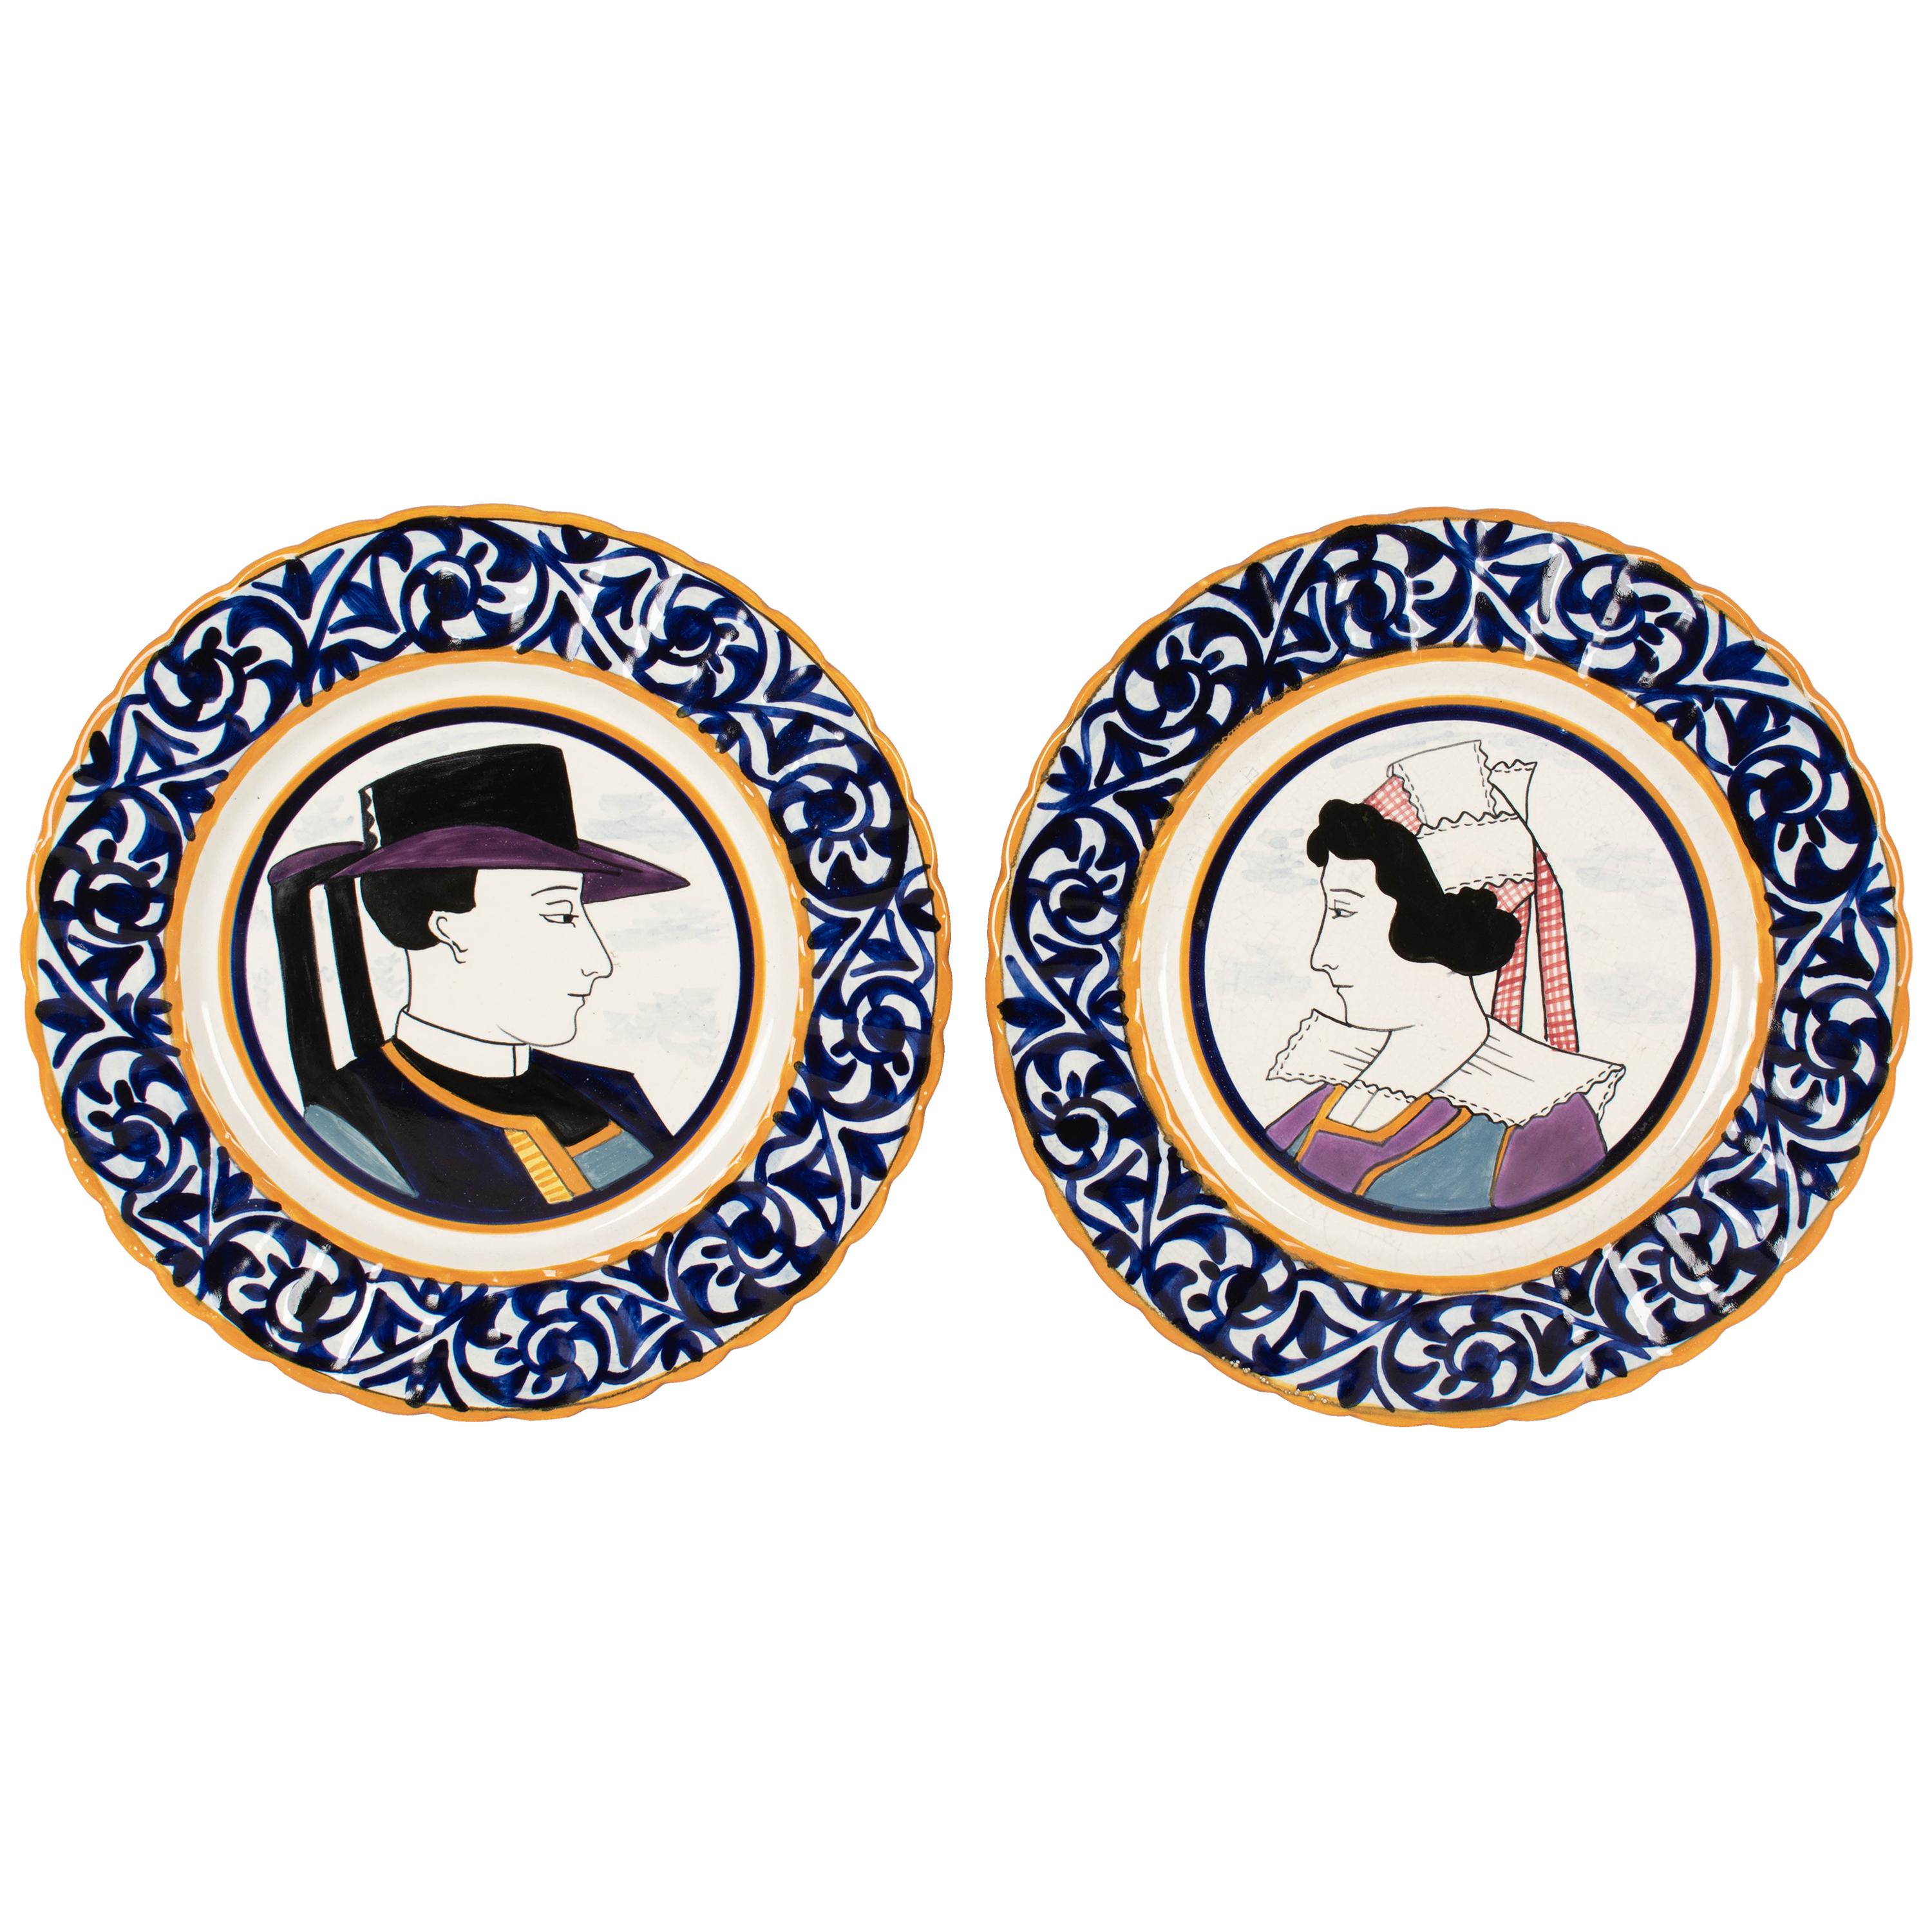 Pair of French Henriot Quimper Faience Plates For Sale